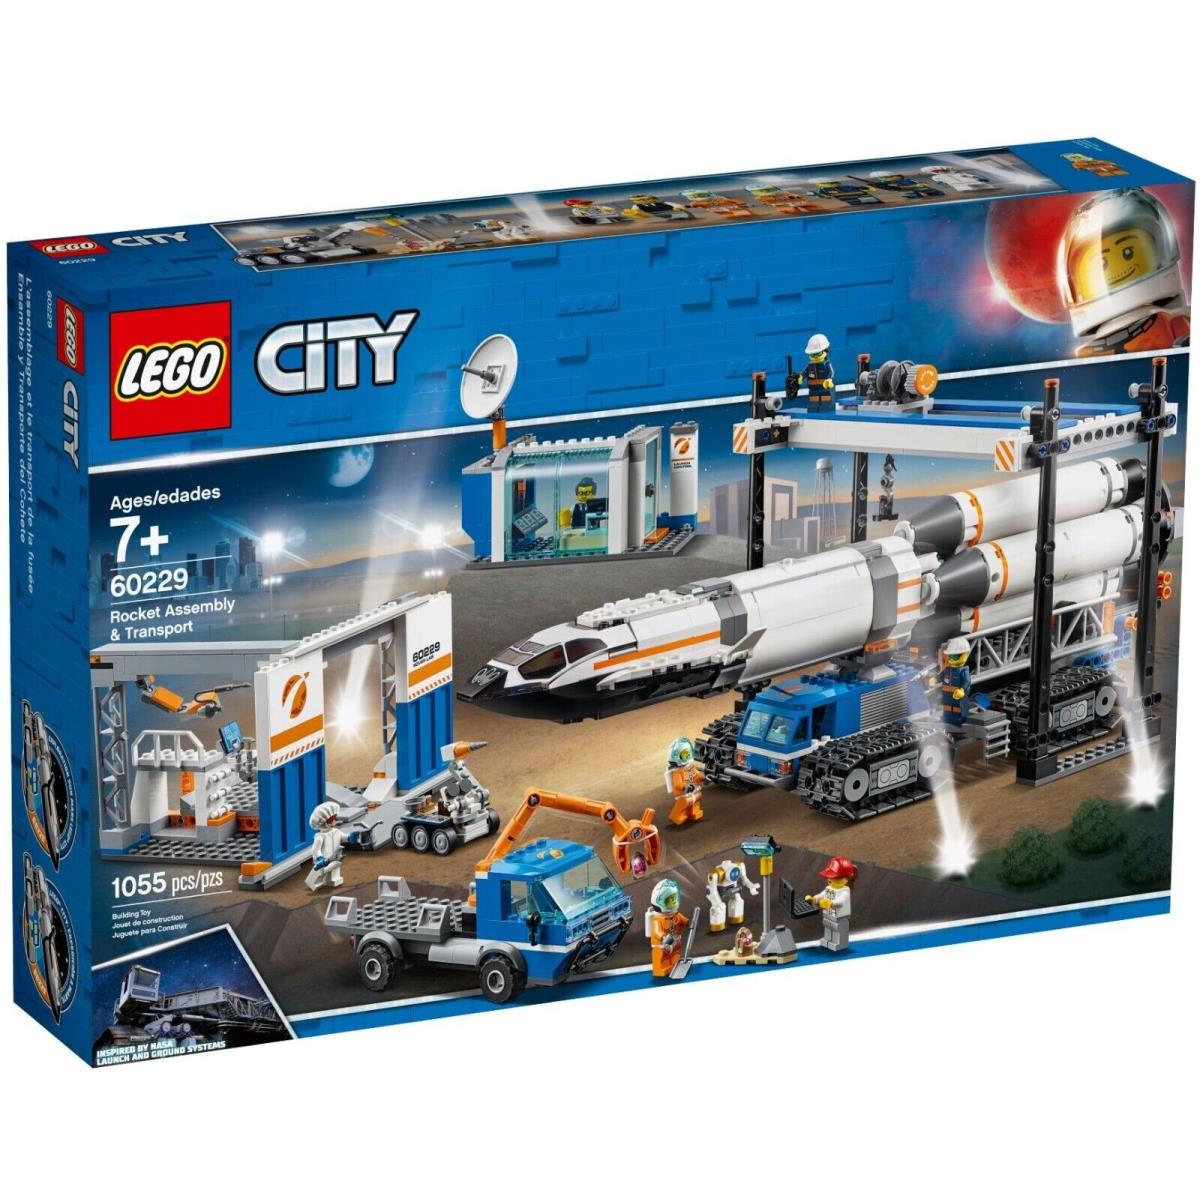 Lego Rocket Assembly and Transport 60229 City Space Set Retired